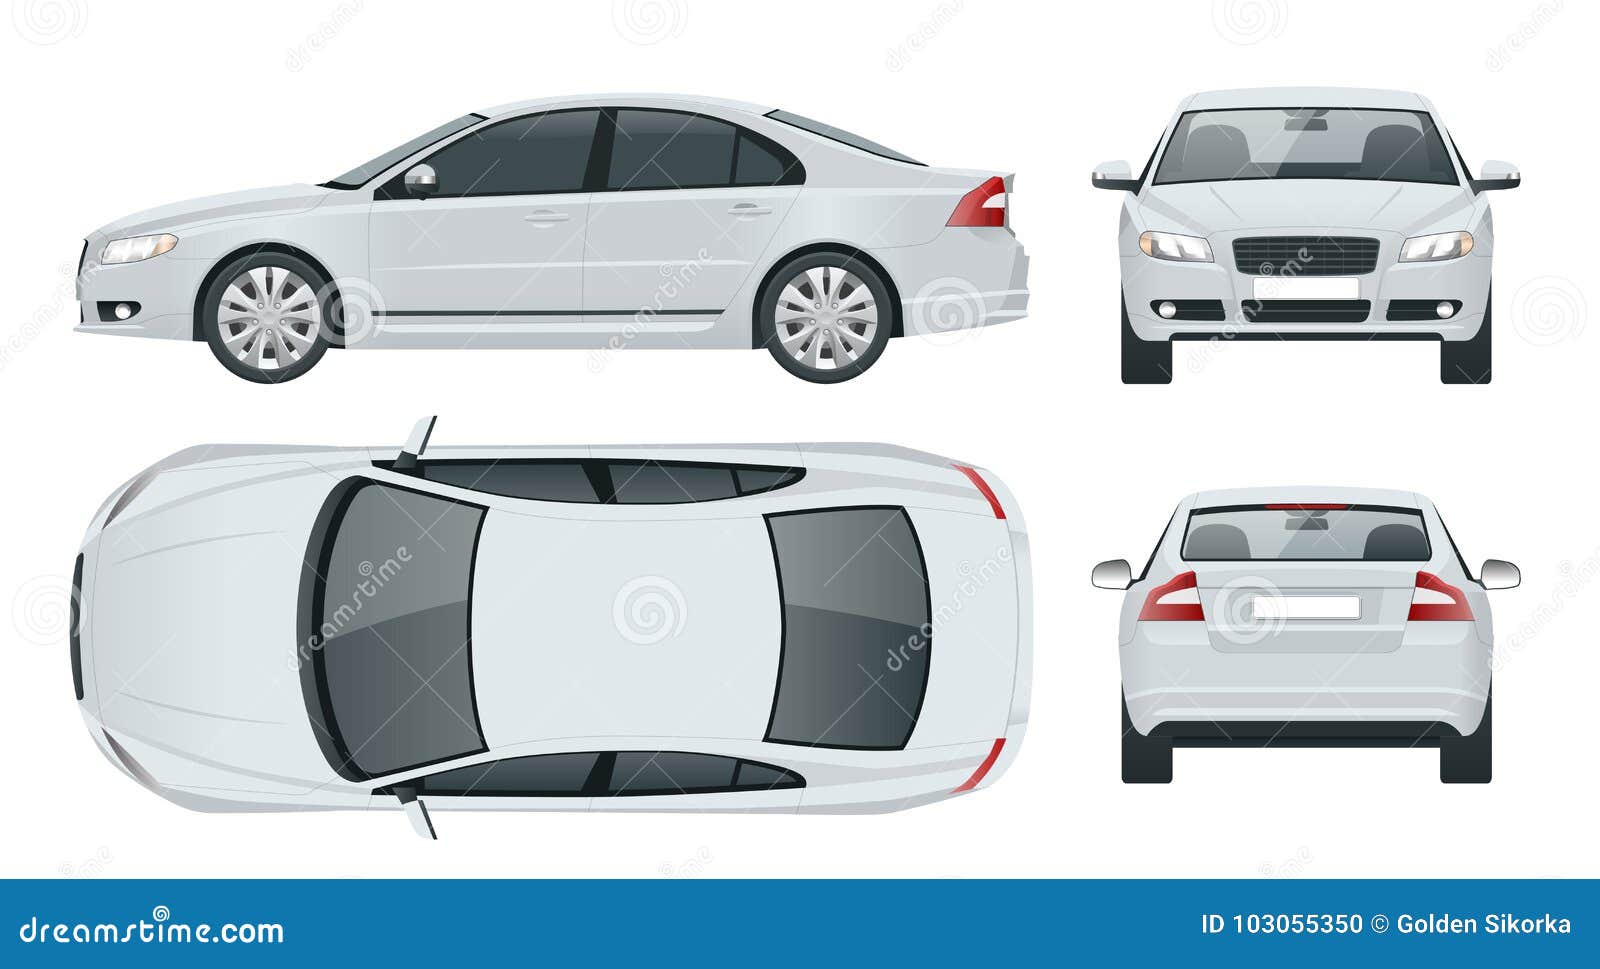 business sedan vehicle. car template    view front, rear, side, top. change the color in one